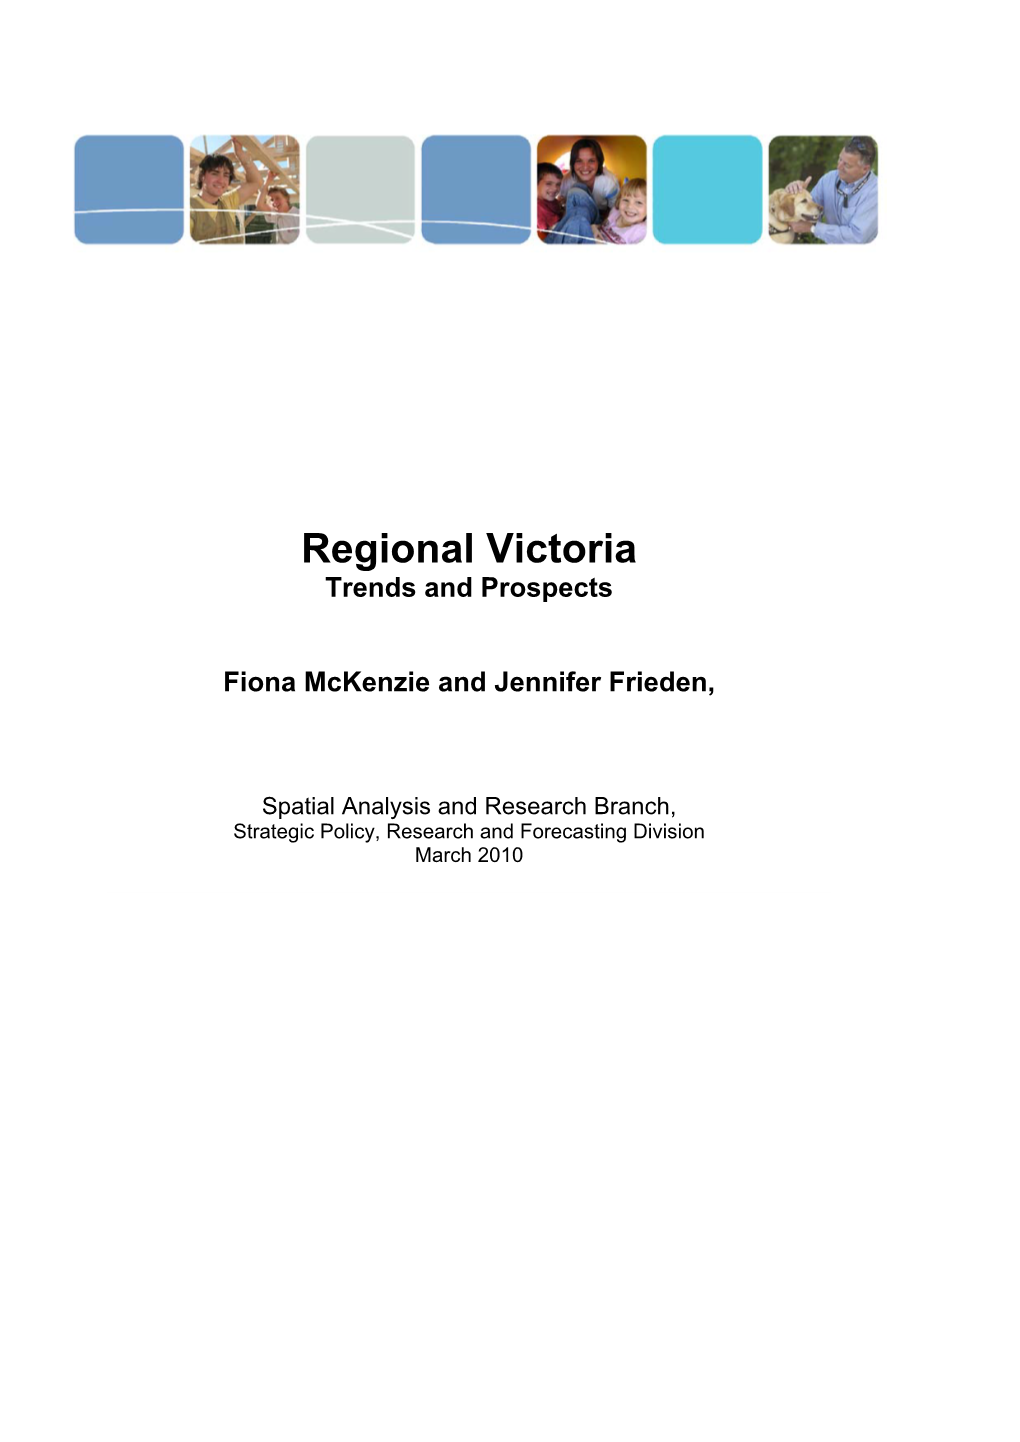 Regional Victoria Trends and Prospects